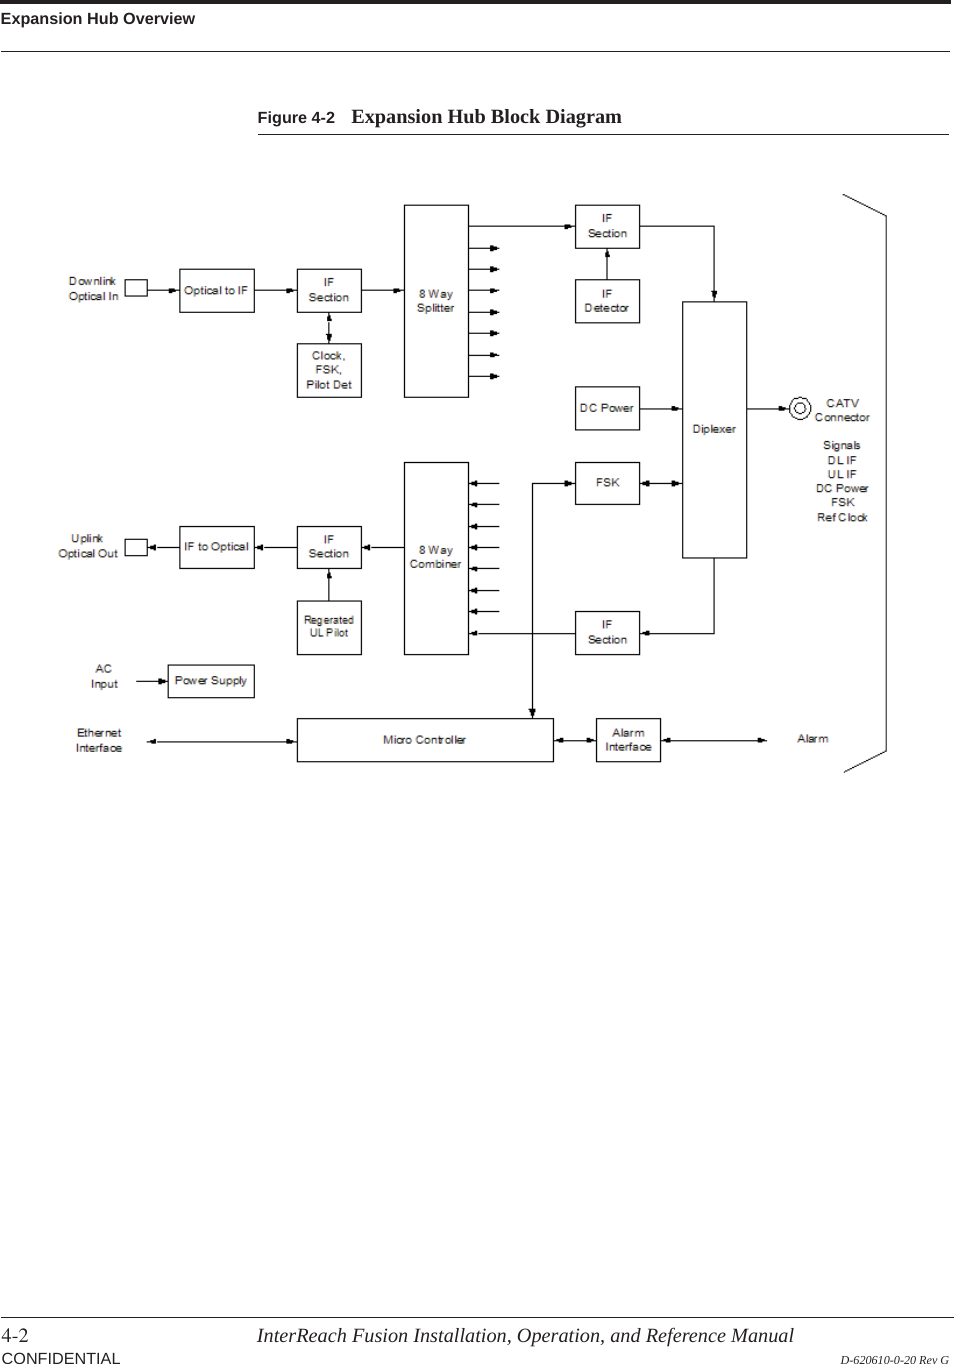 Expansion Hub Overview4-2 InterReach Fusion Installation, Operation, and Reference Manual  CONFIDENTIAL D-620610-0-20 Rev GFigure 4-2 Expansion Hub Block Diagram